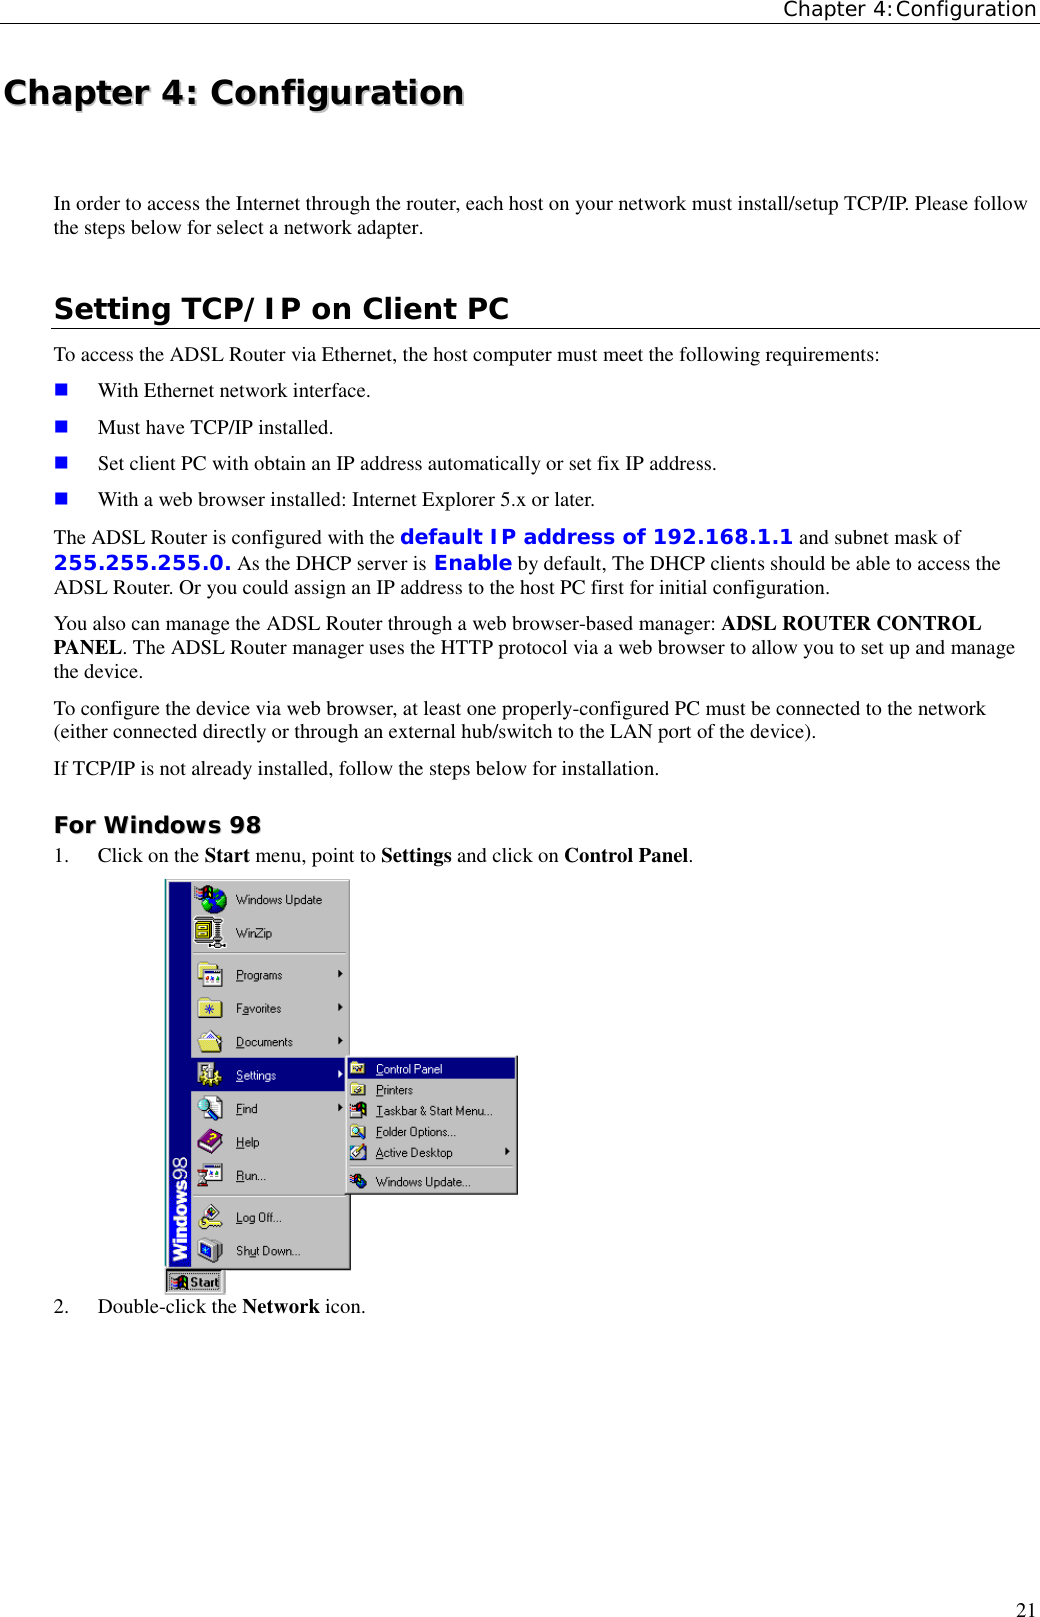 Chapter 4:Configuration21CChhaapptteerr  44::  CCoonnffiigguurraattiioonnIn order to access the Internet through the router, each host on your network must install/setup TCP/IP. Please followthe steps below for select a network adapter.Setting TCP/IP on Client PCTo access the ADSL Router via Ethernet, the host computer must meet the following requirements: With Ethernet network interface. Must have TCP/IP installed. Set client PC with obtain an IP address automatically or set fix IP address. With a web browser installed: Internet Explorer 5.x or later.The ADSL Router is configured with the default IP address of 192.168.1.1 and subnet mask of255.255.255.0. As the DHCP server is Enable by default, The DHCP clients should be able to access theADSL Router. Or you could assign an IP address to the host PC first for initial configuration.You also can manage the ADSL Router through a web browser-based manager: ADSL ROUTER CONTROLPANEL. The ADSL Router manager uses the HTTP protocol via a web browser to allow you to set up and managethe device.To configure the device via web browser, at least one properly-configured PC must be connected to the network(either connected directly or through an external hub/switch to the LAN port of the device).If TCP/IP is not already installed, follow the steps below for installation.FFoorr  WWiinnddoowwss  99881. Click on the Start menu, point to Settings and click on Control Panel.2. Double-click the Network icon.